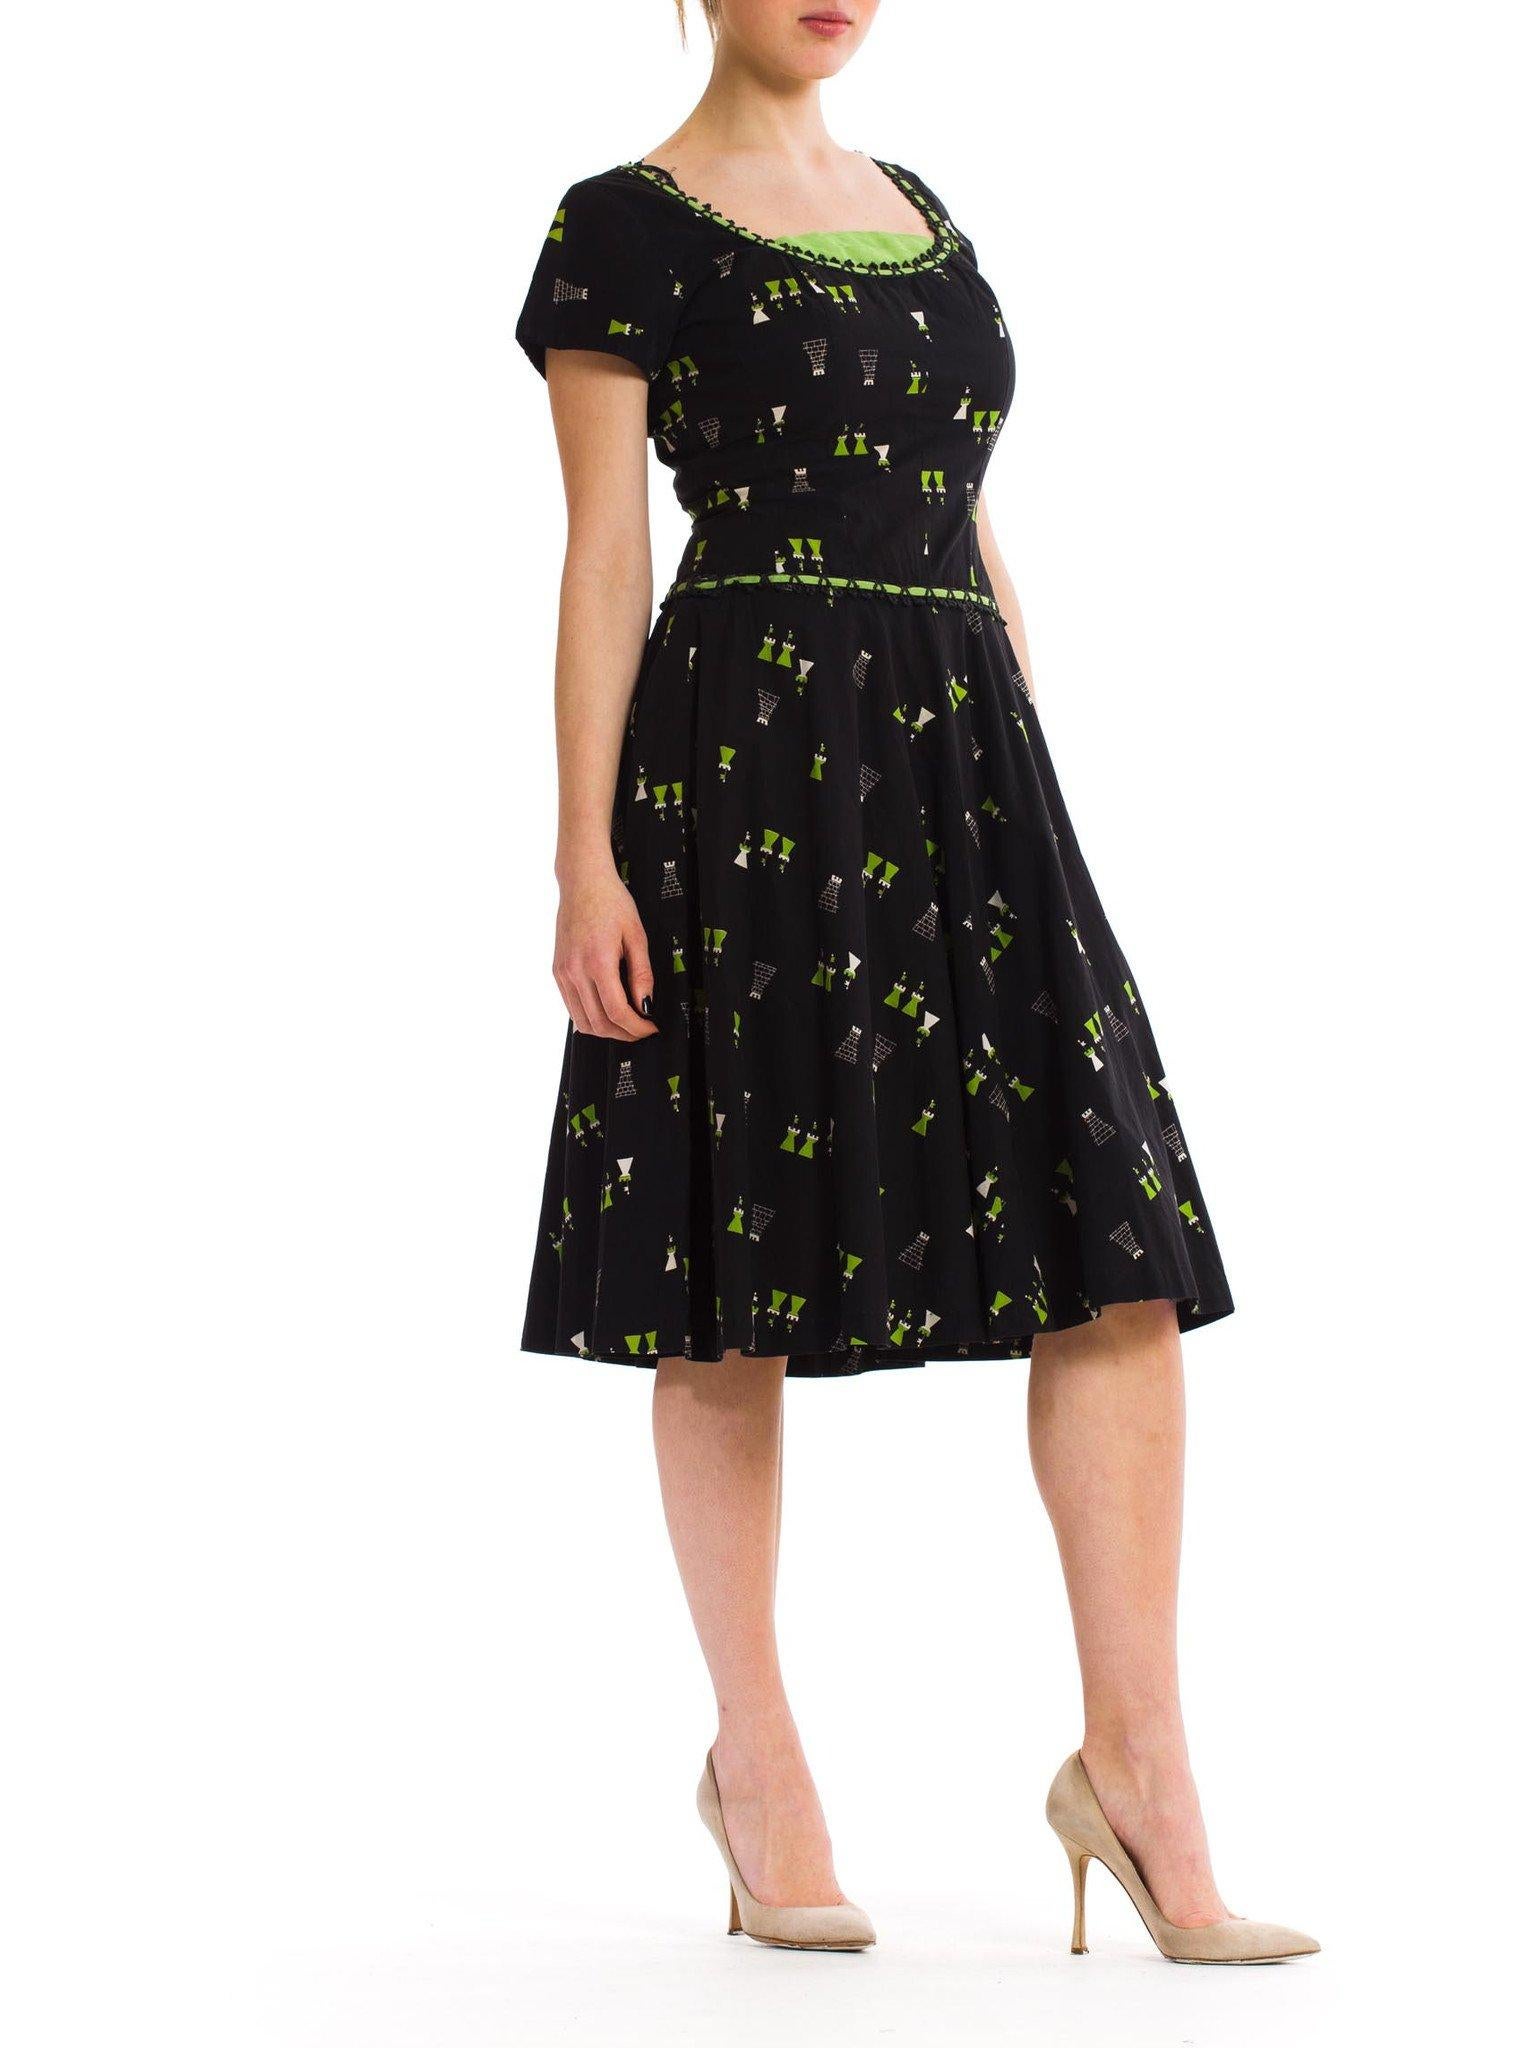 1950S Black Cotton Day Dress Printed With Cute Green Castles In Excellent Condition For Sale In New York, NY